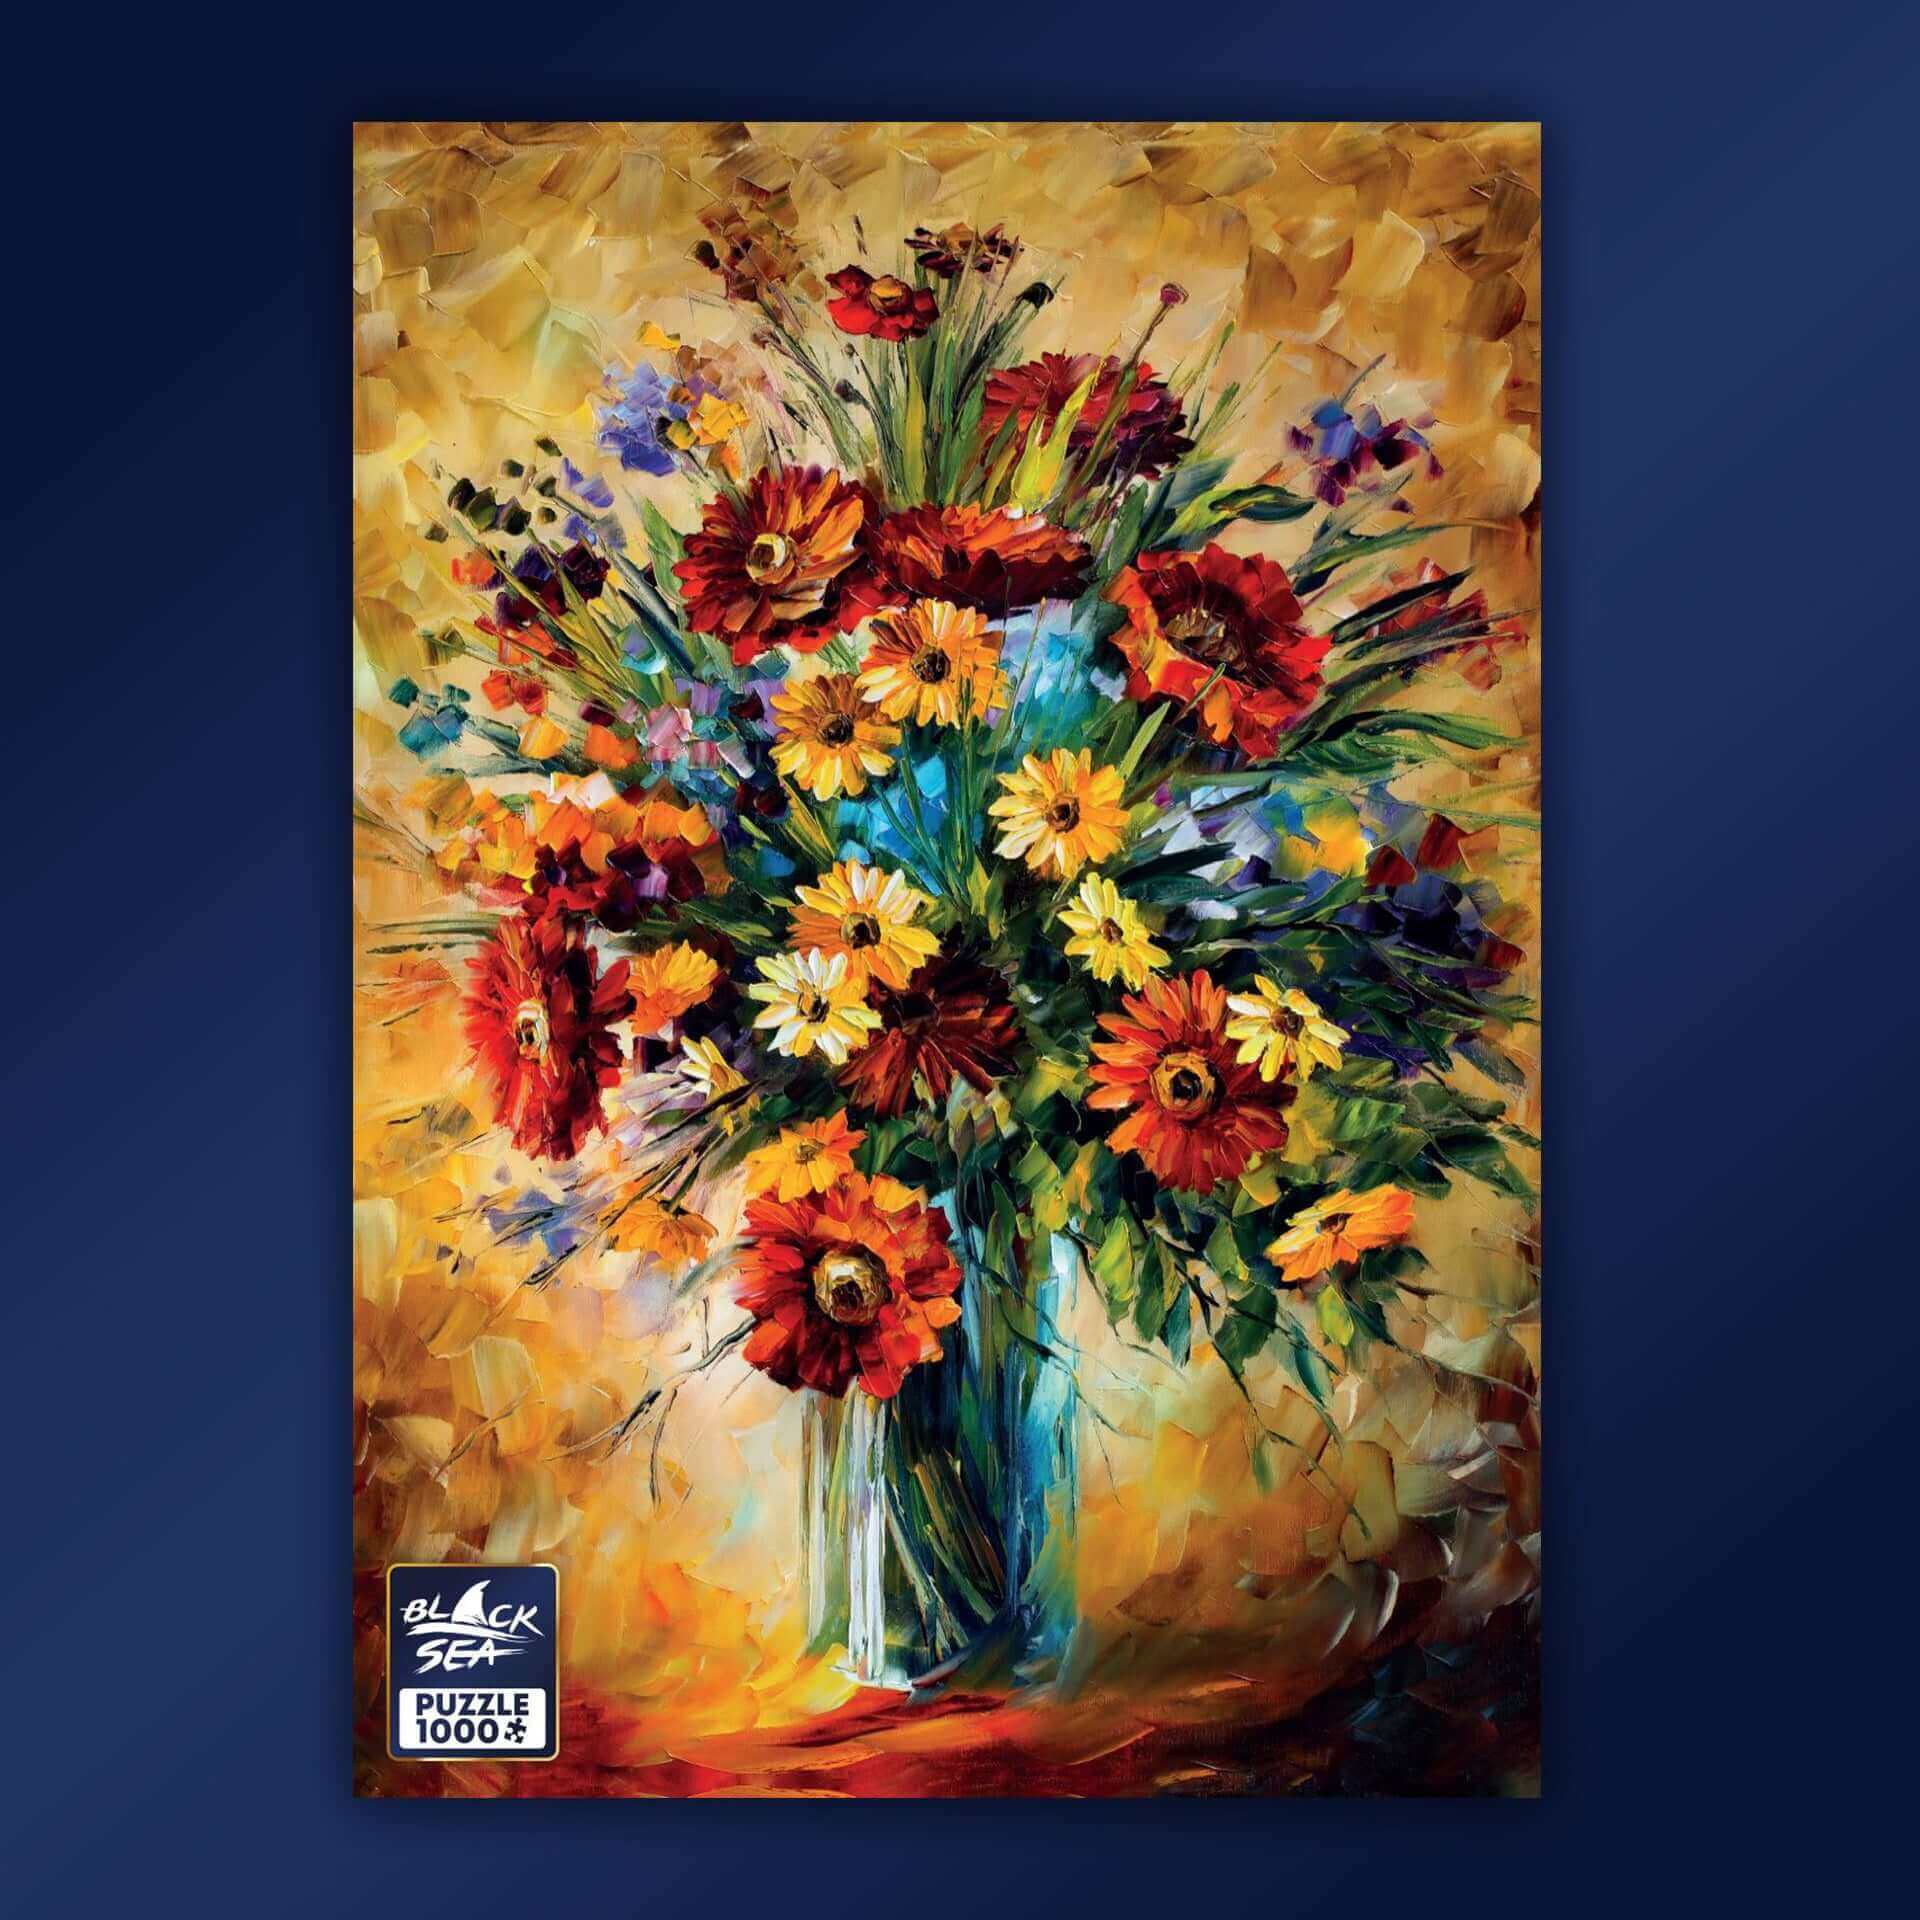 Puzzle Black Sea Premium 1000 pieces - Magical Flowers, The artist's brush has captured the scent of summer, gathered in a bouquet and sealed in a painting. Every colored stroke, thin line and light and shadow are in perfect harmony. A moment of perfectio